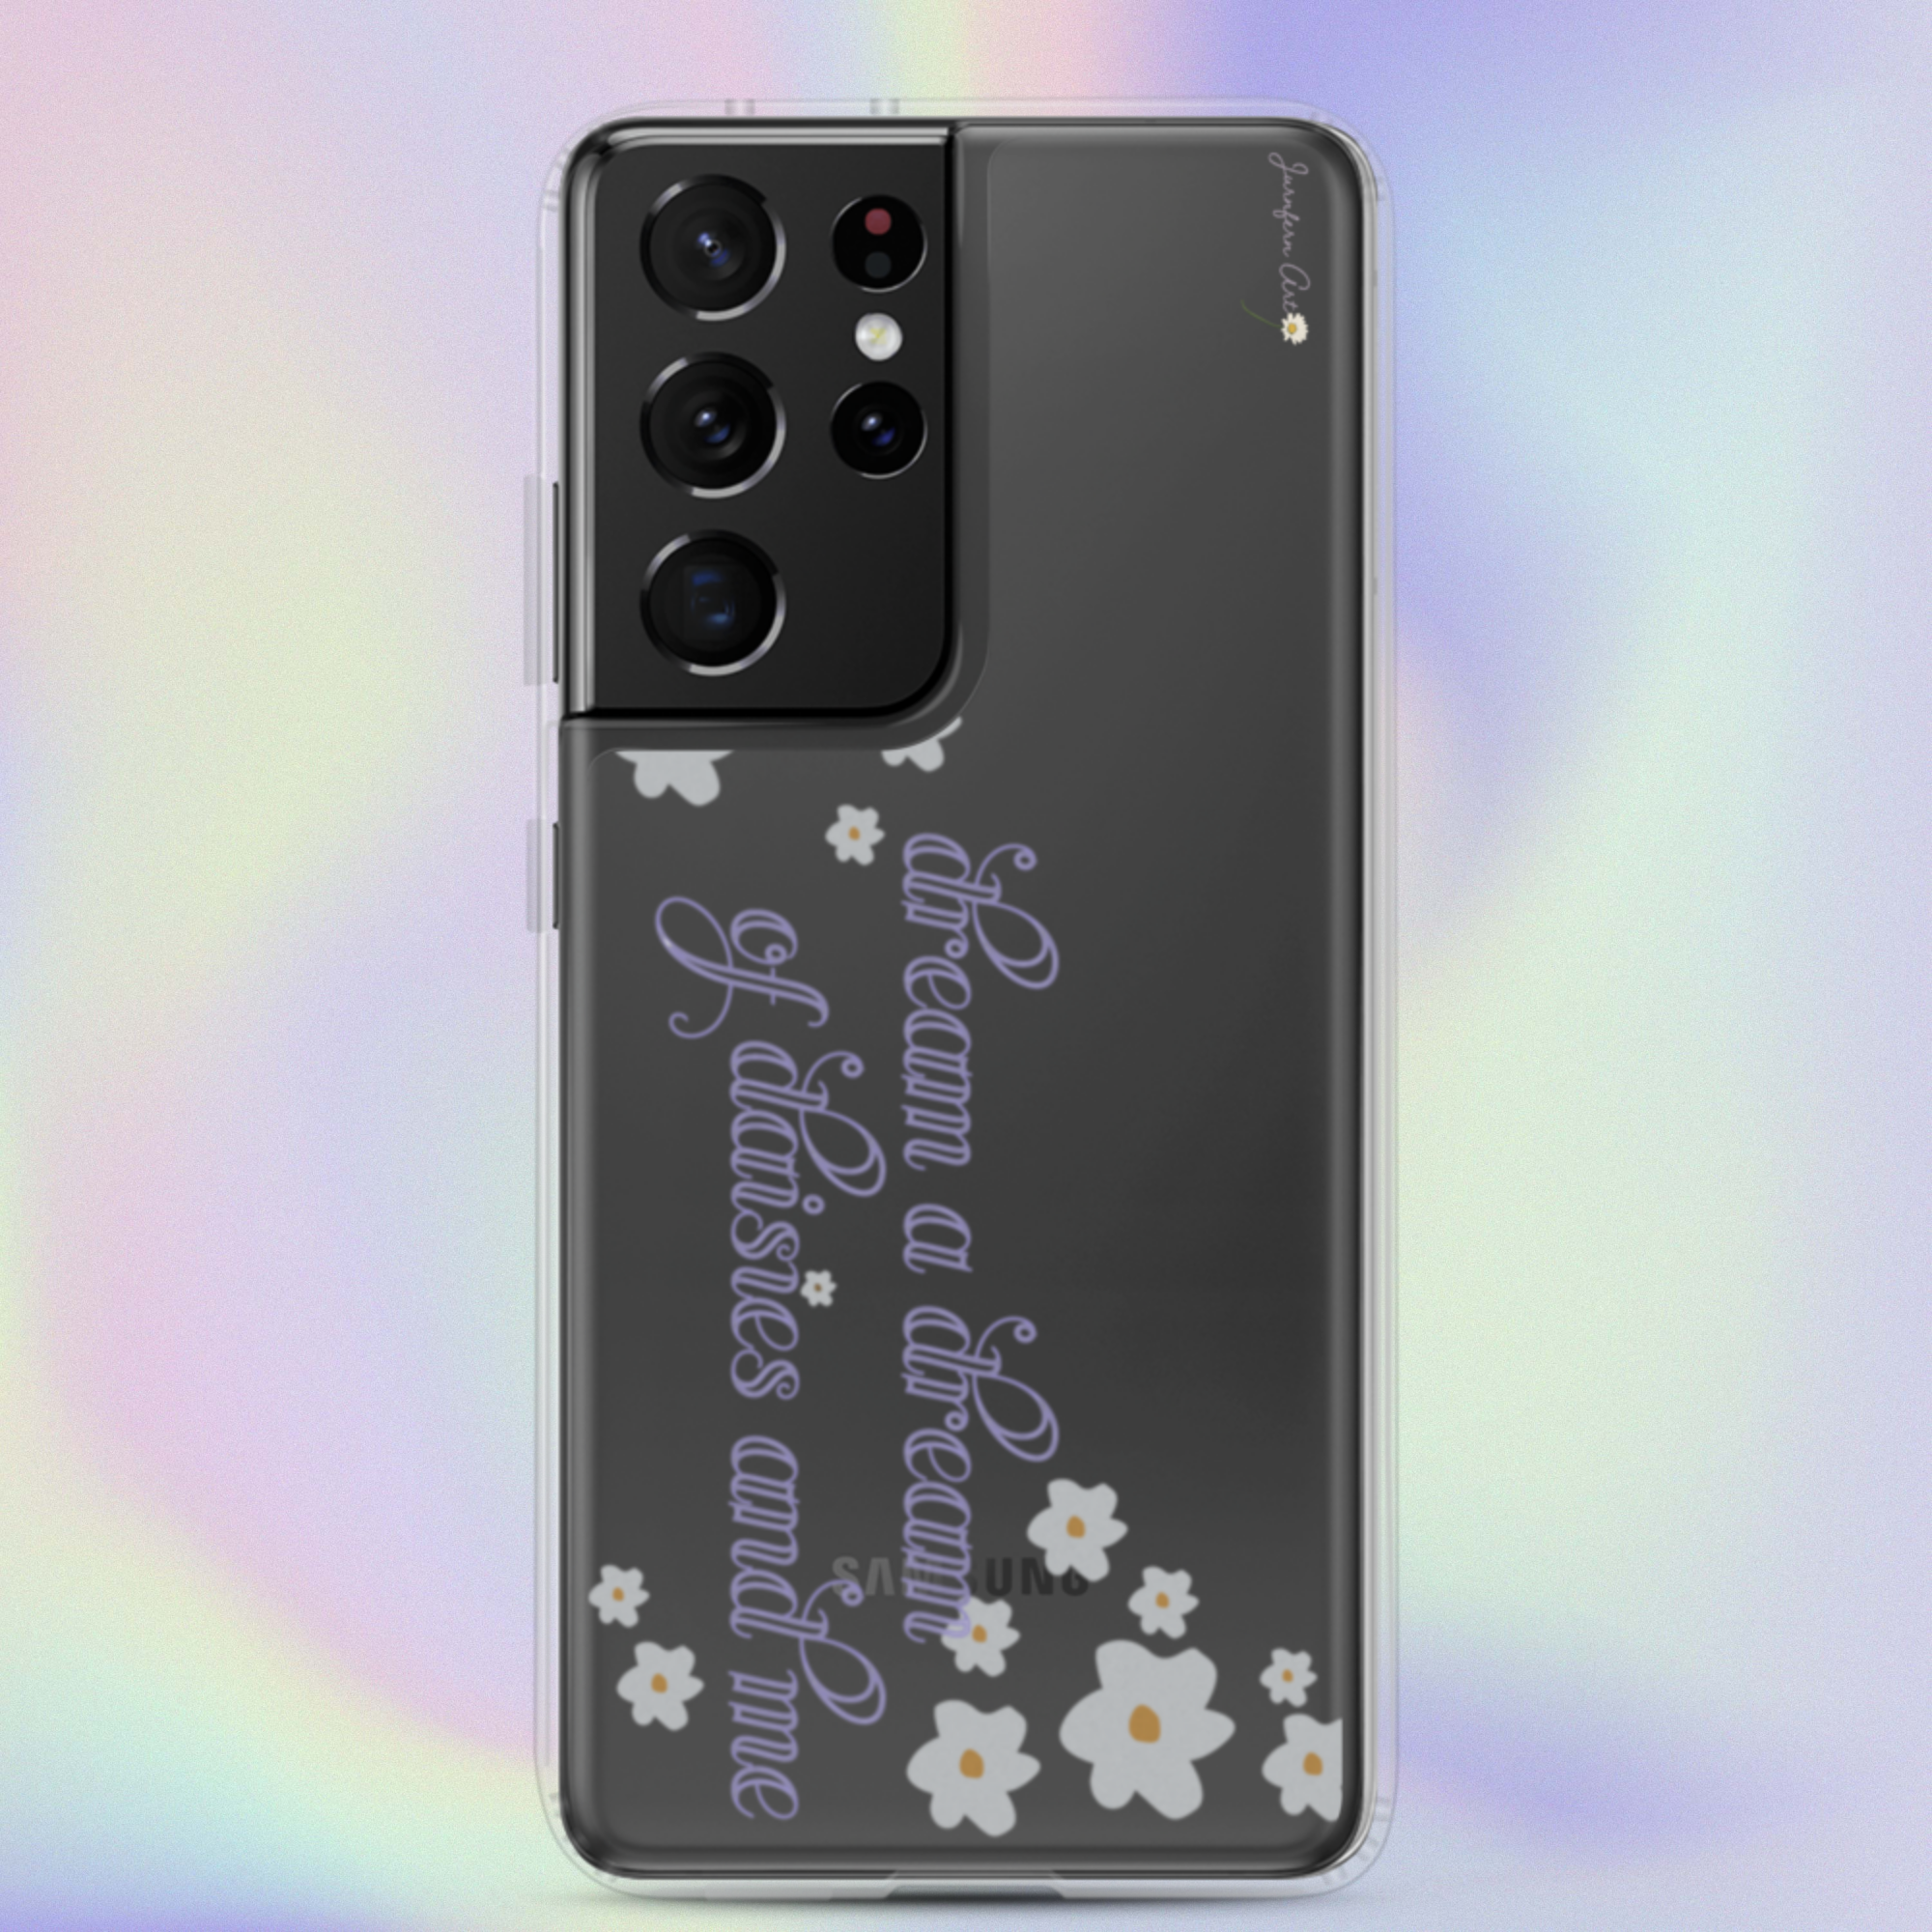 A transparent Samsung Galaxy S21 Ultra phone case with cursive lavender text on it that reads "dream a dream of daisies and me" surrounded by small daisies